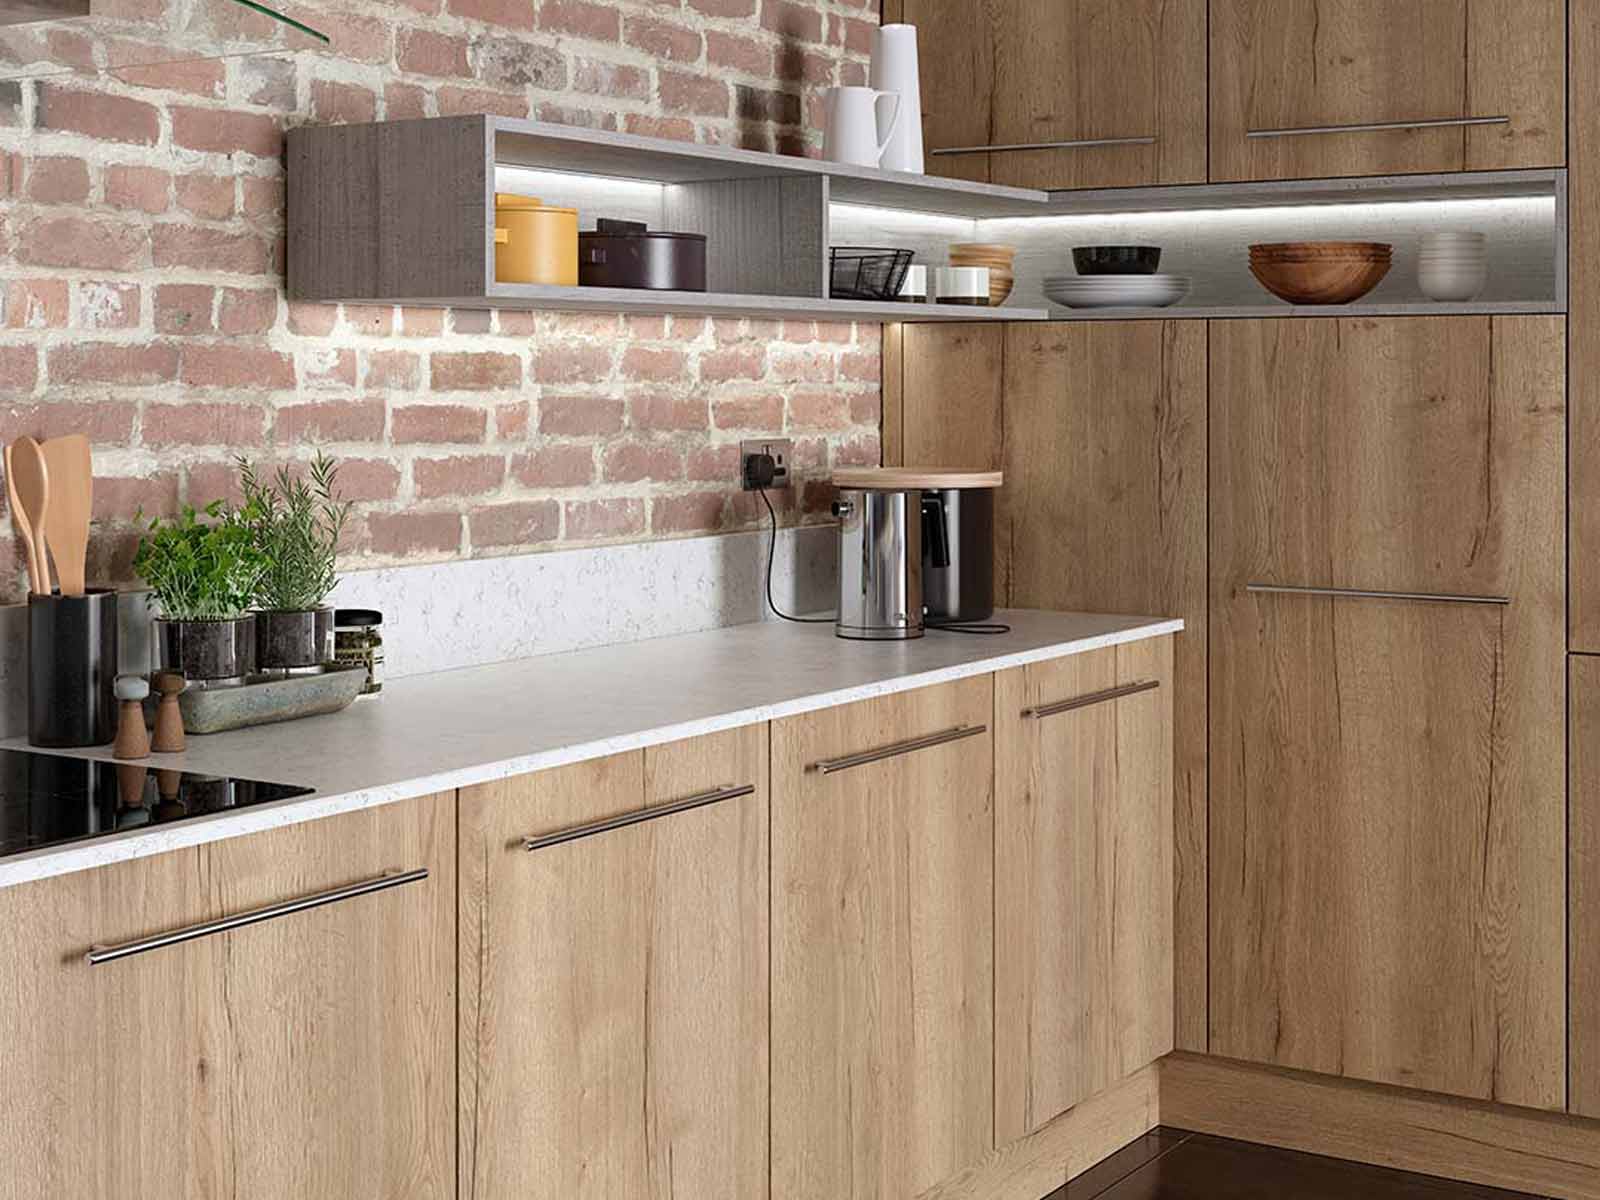 Open shelving used in a modern kitchen to encourage airflow for pantry storage